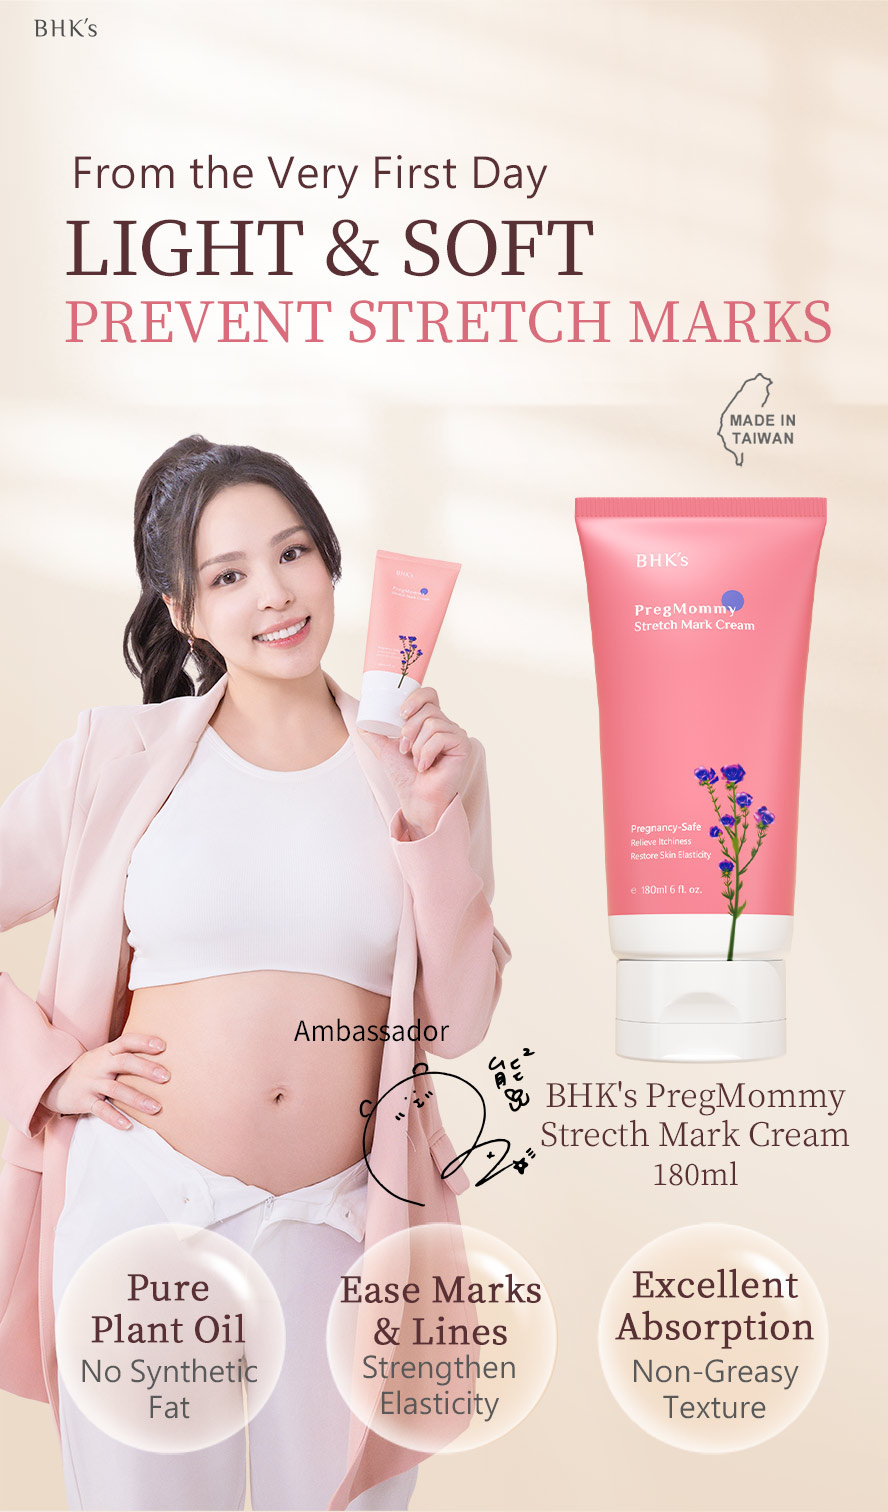 BHK's PregMommy Stretch Mark Cream uses pure plant oil with rich omega-3 and no synthetic fat to effectively enhance skin elasticity and prevent stretch marks.